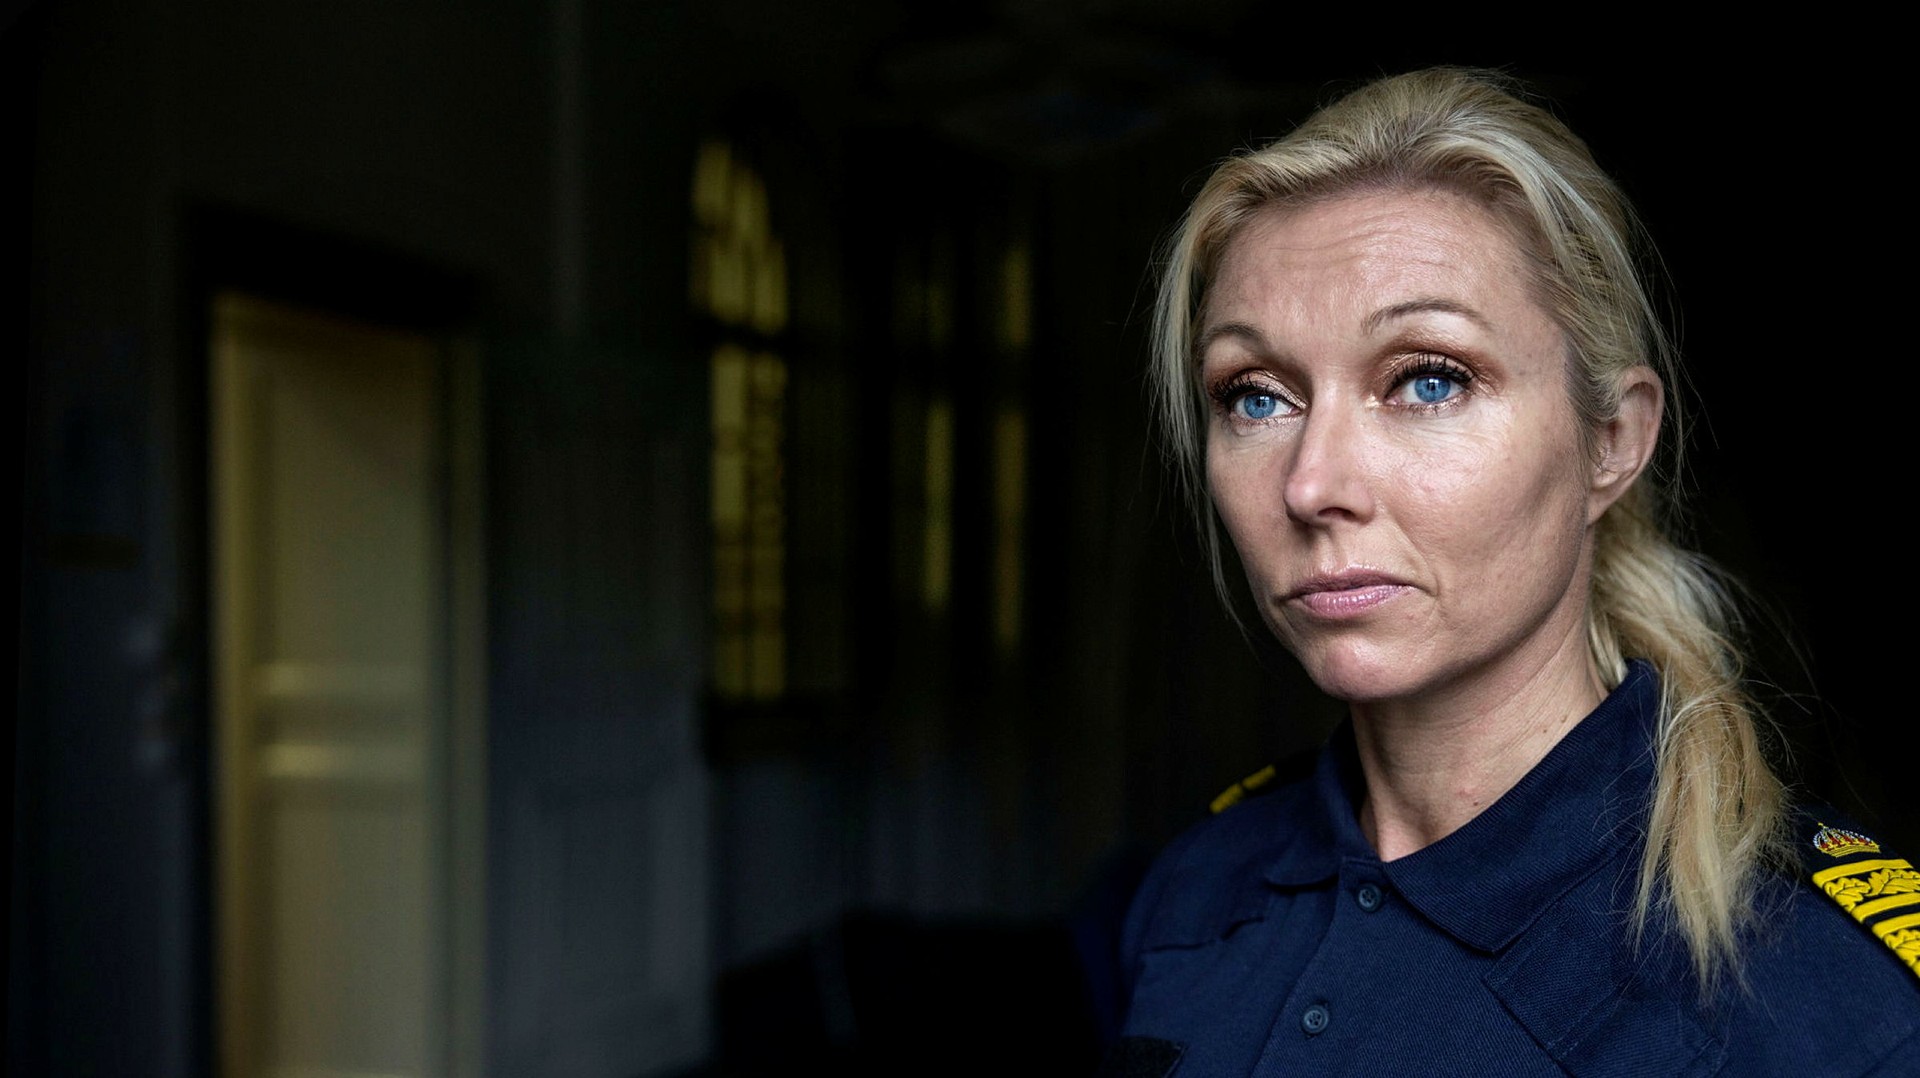 The chief of Swedish Police Linda Hansson Staaf on January 31, 2022.